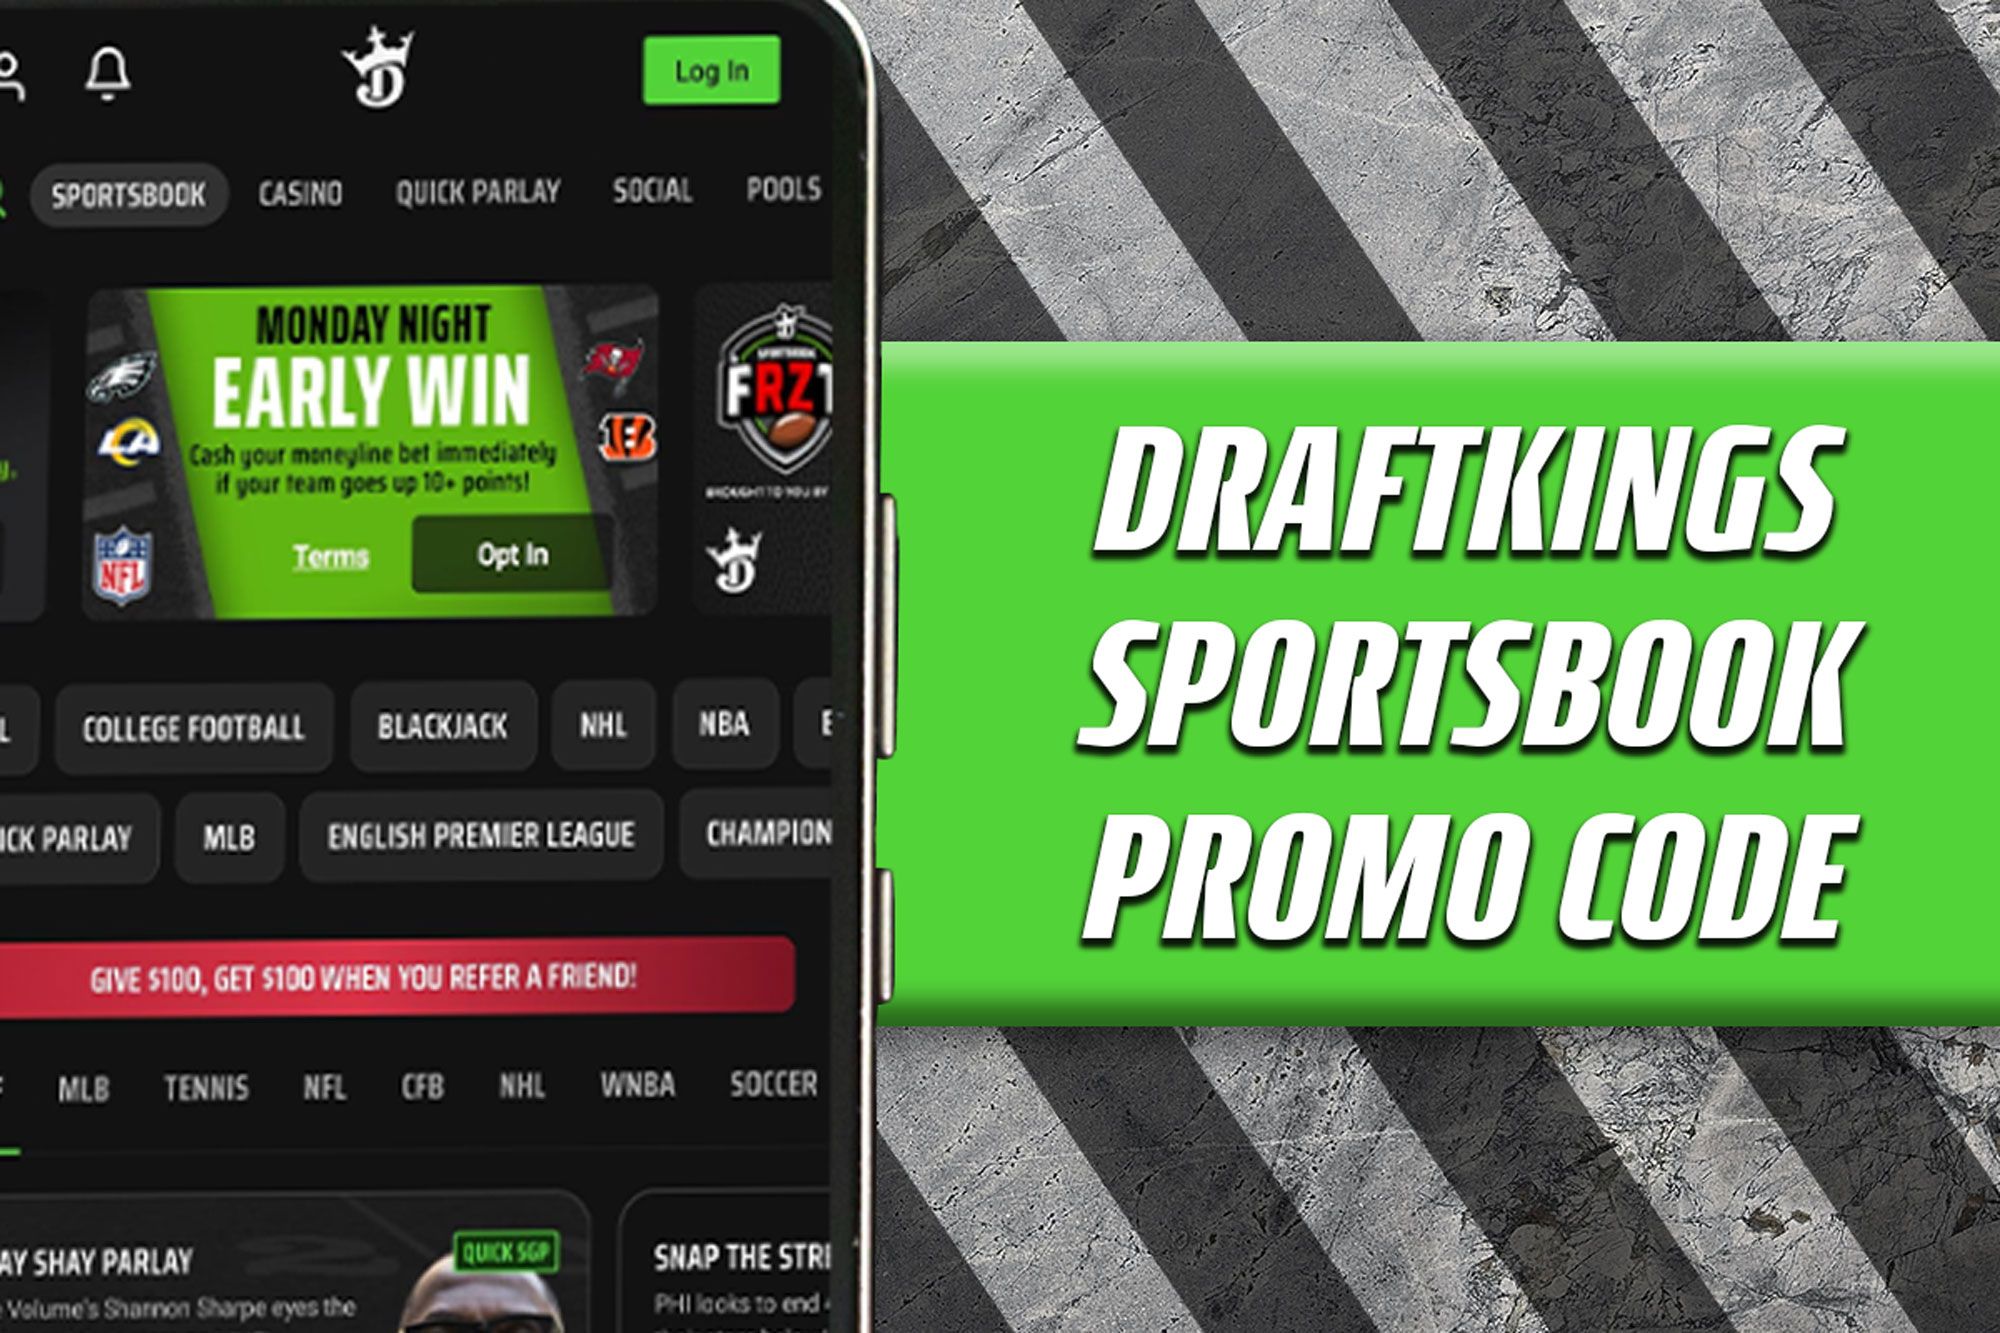 DraftKings adds betting deal with Professional Fighters League